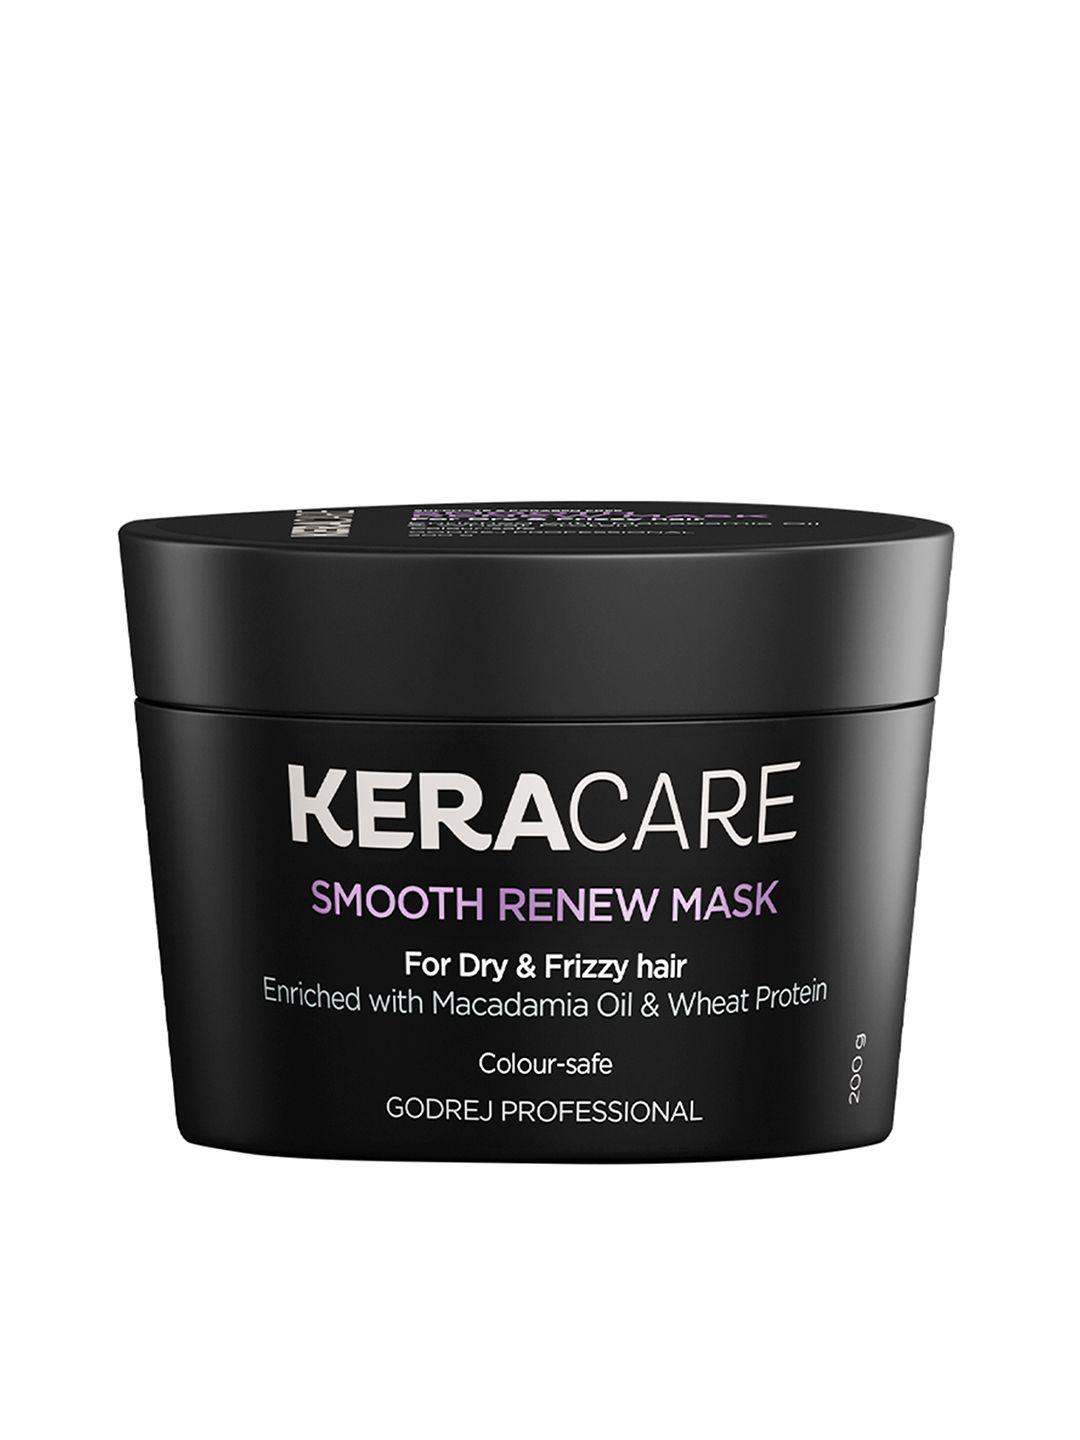 godrej professional keracare smooth renew mask for dry & frizzy hair - 200 g